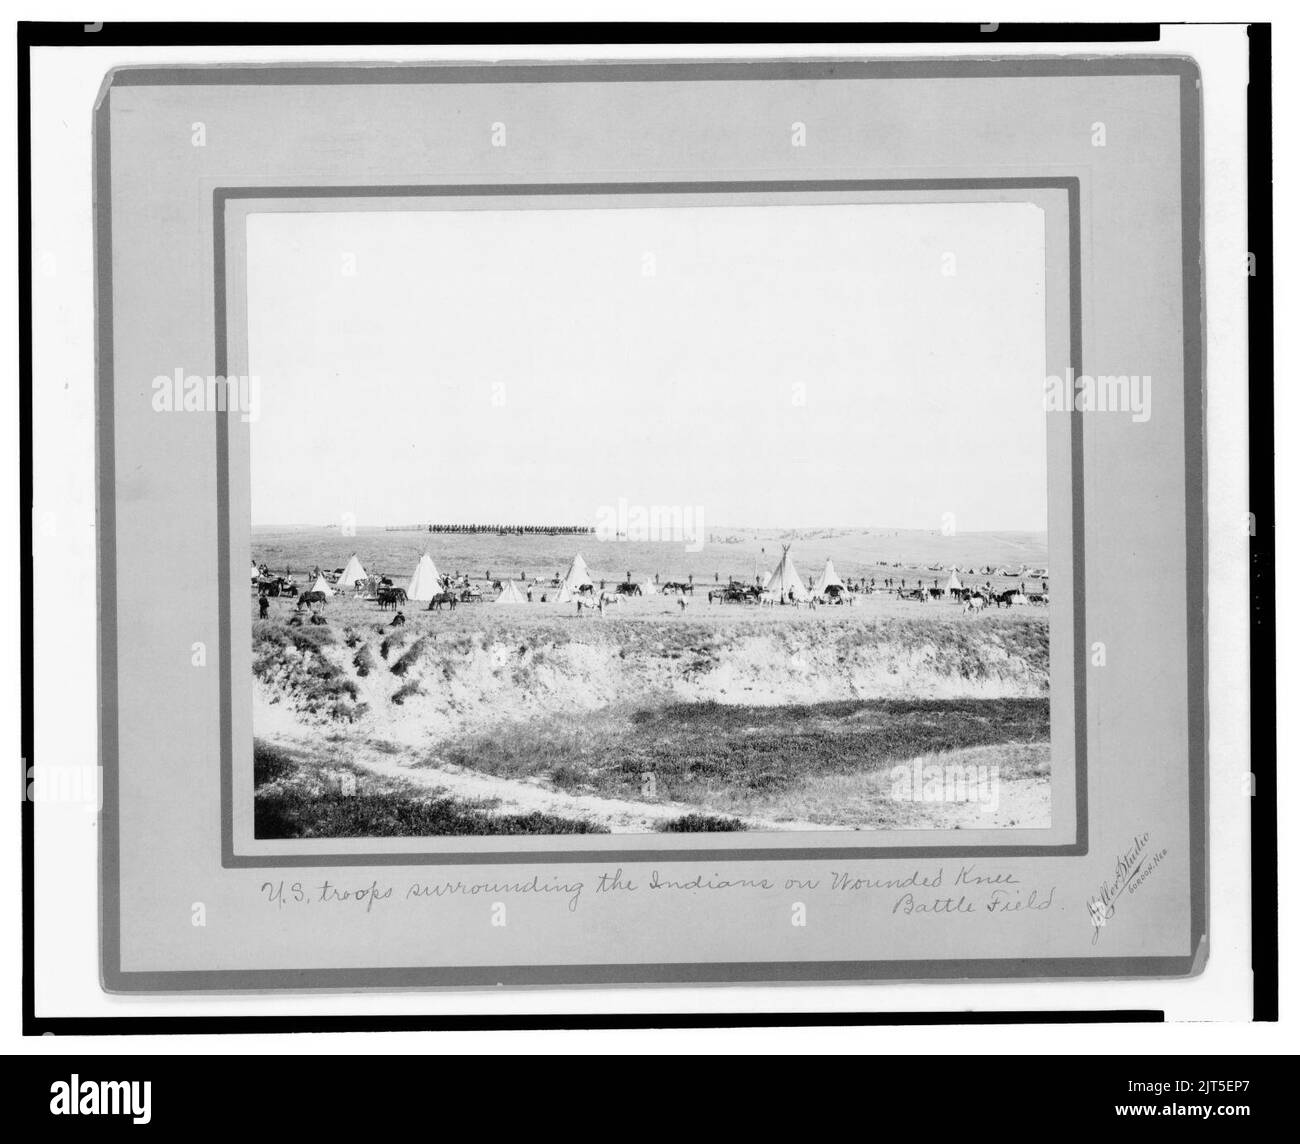 U.S. troops surrounding the Indians on Wounded Knee battle field - Miller Studio, Gordon, Neb. Stock Photo